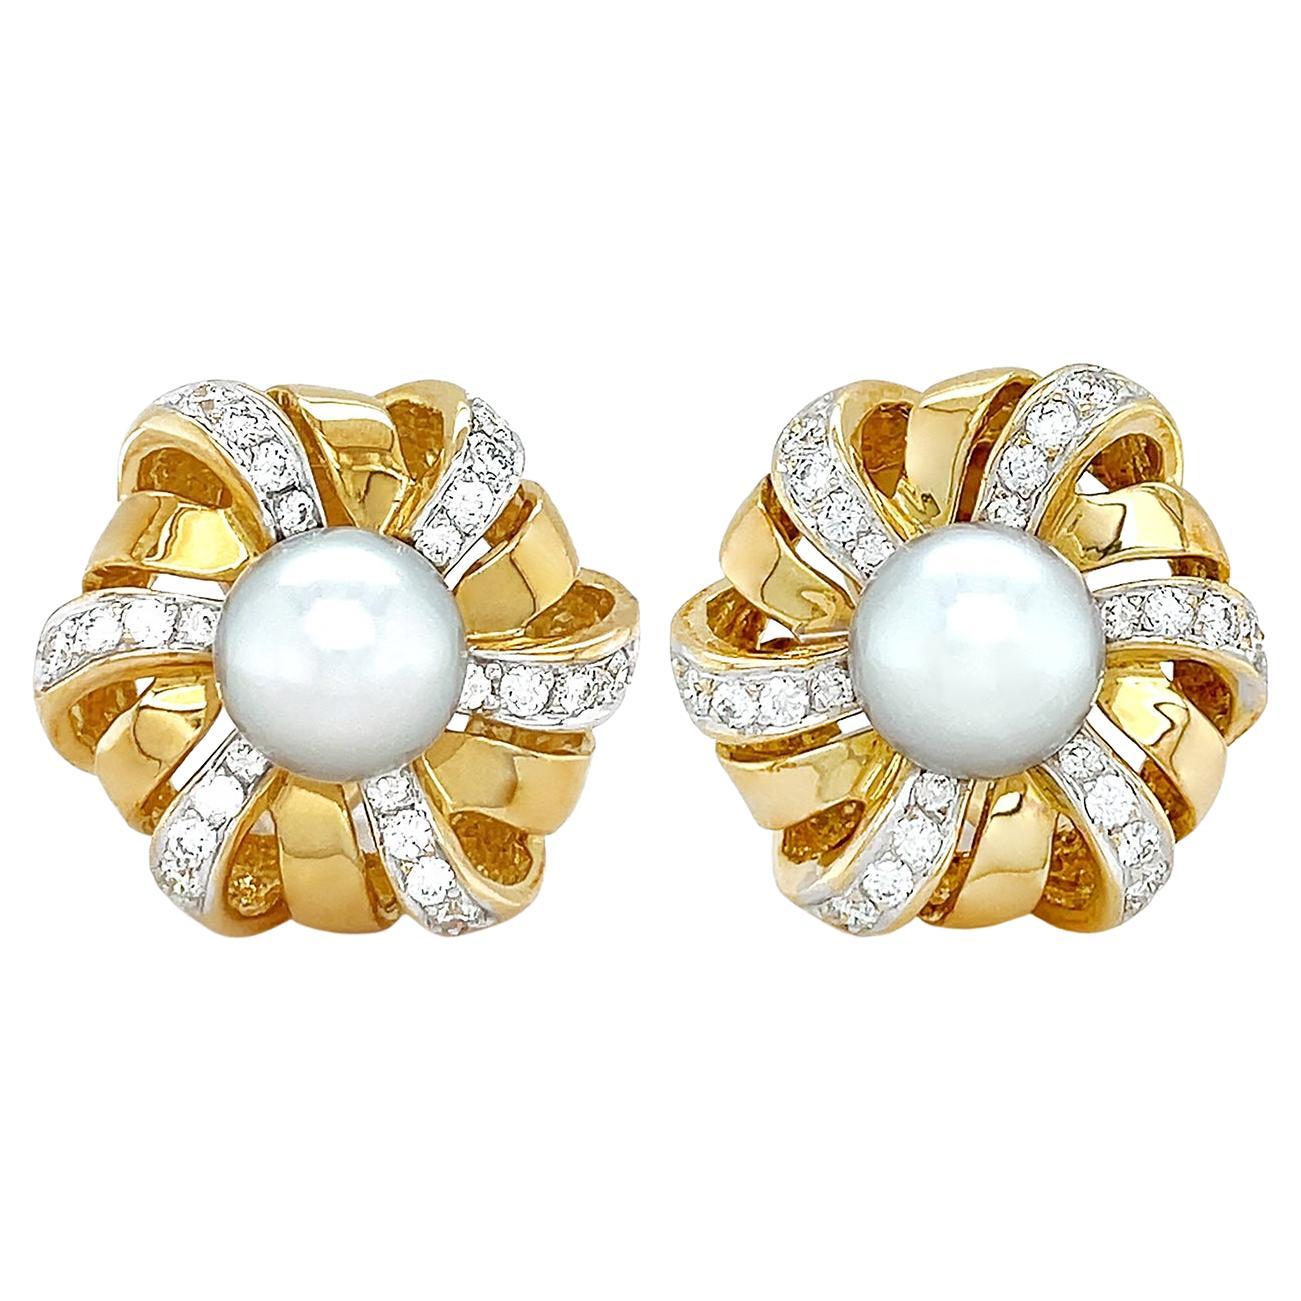 18K Yellow Gold Round White Pearl and Diamond Spin Clip-on Earrings